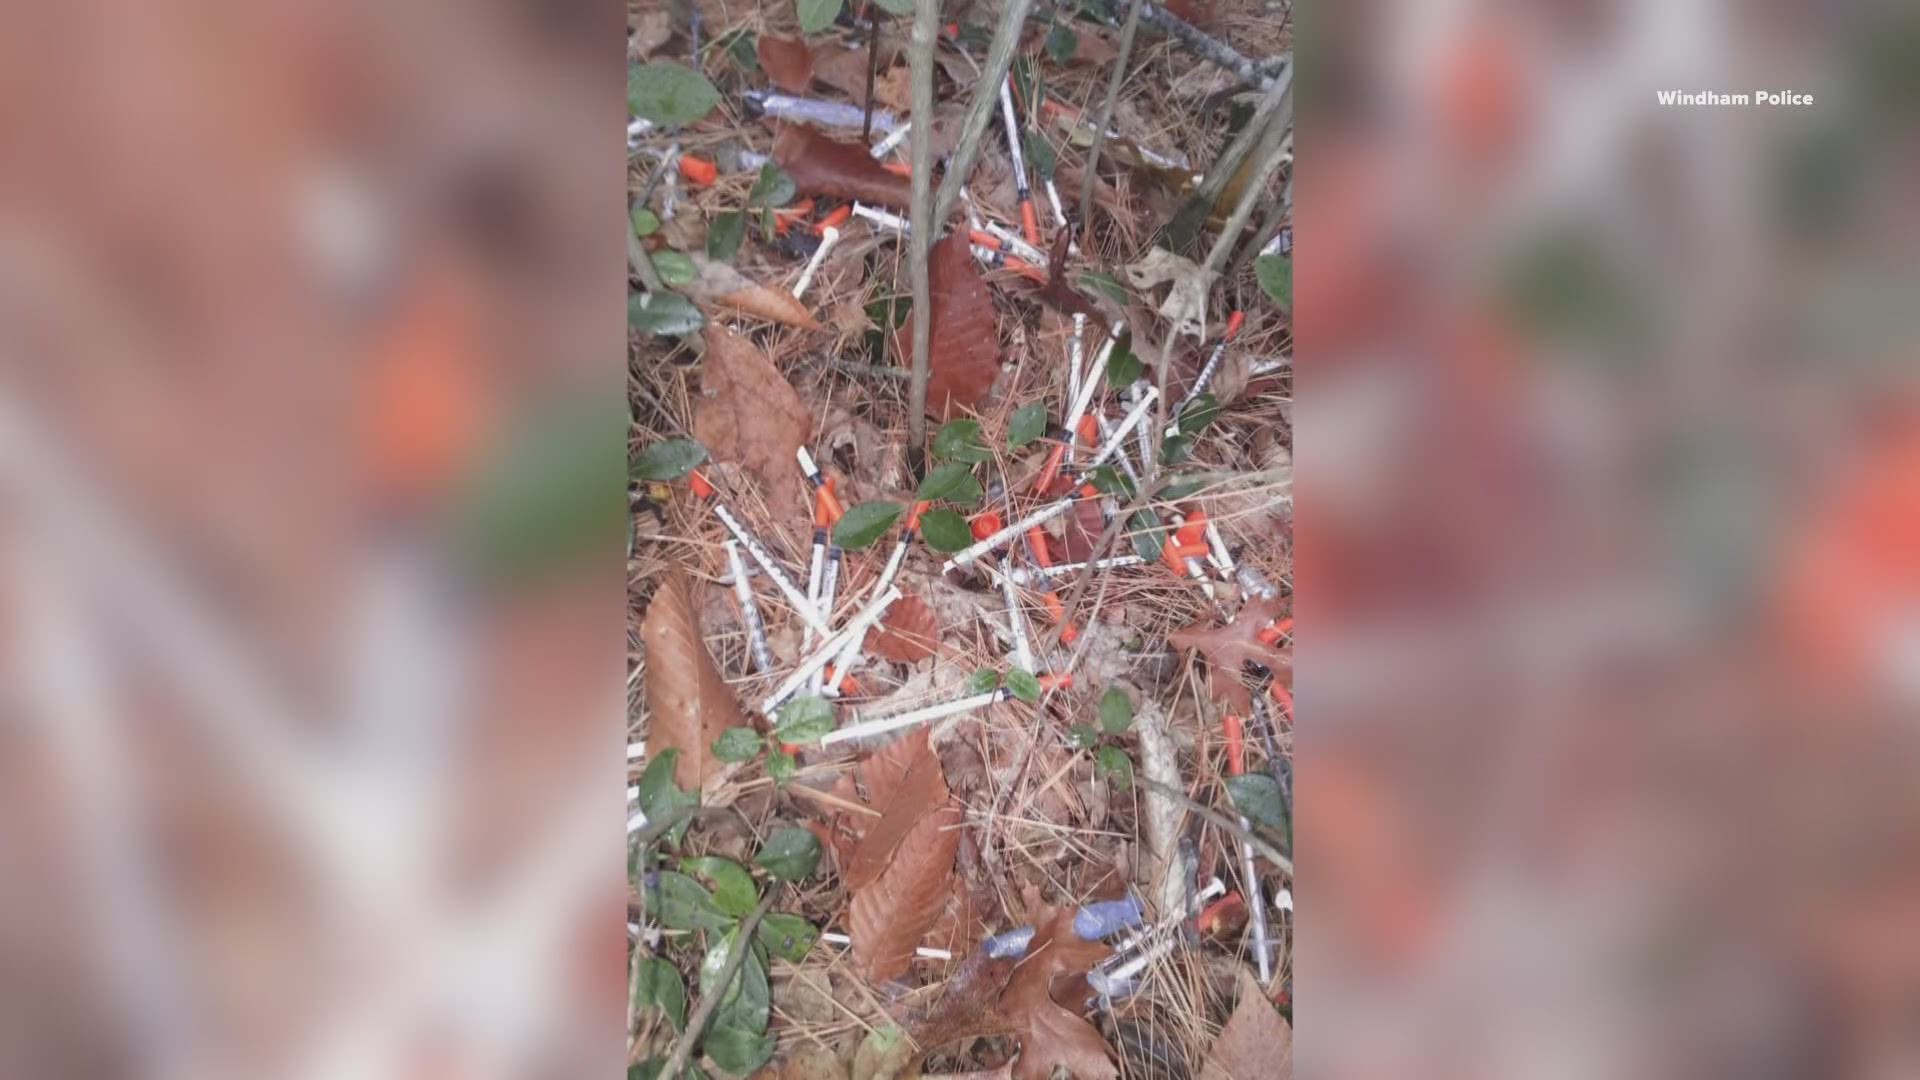 Windham Police say nearly 80 hypodermic syringes were found along a popular walking path.